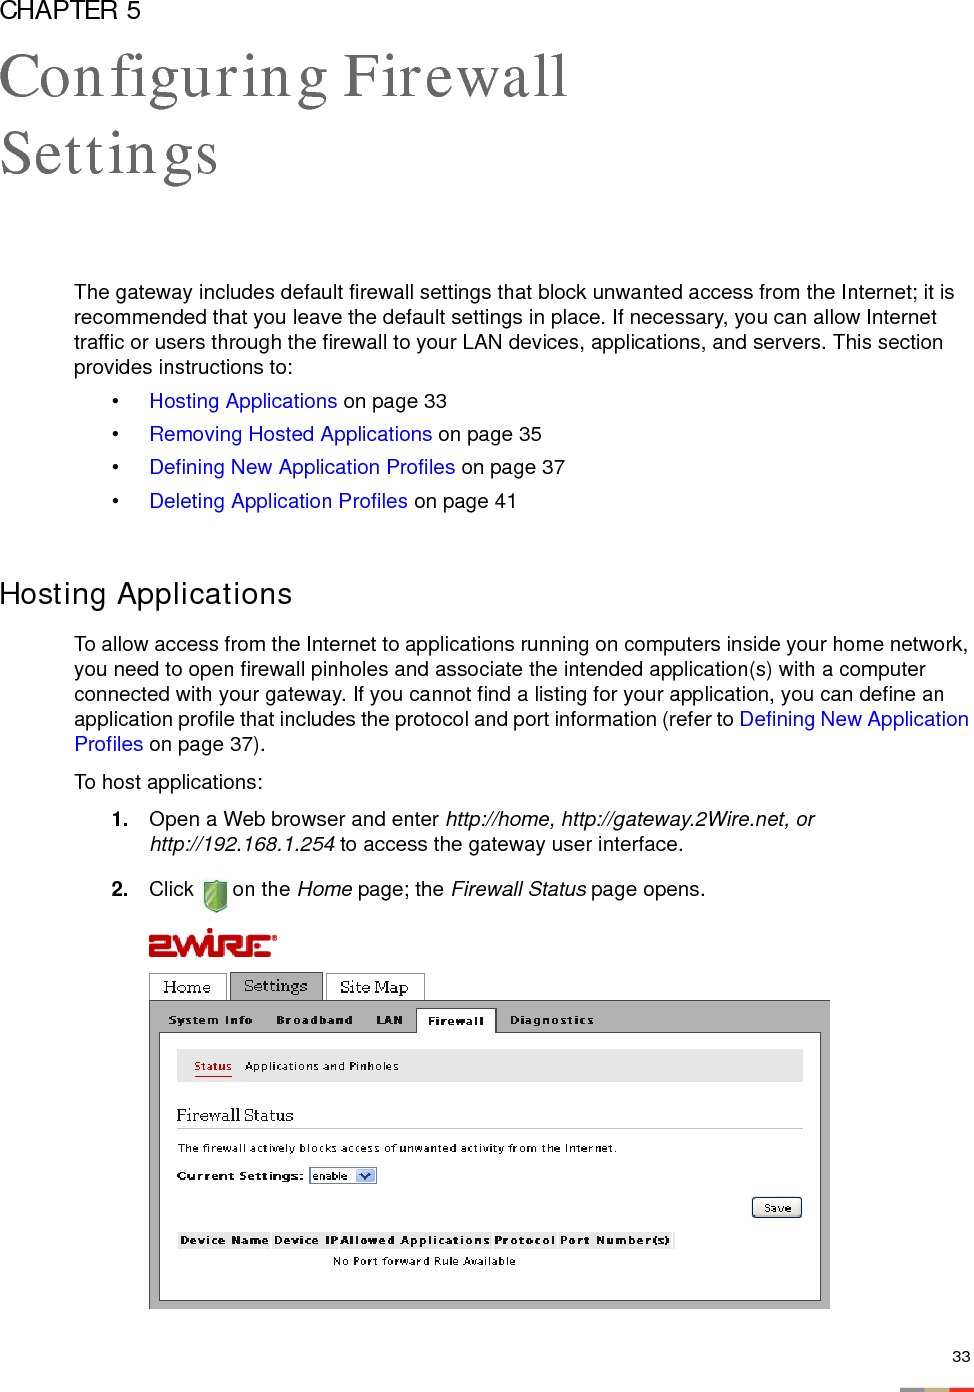 33CHAPTER 5Configuring Firewall SettingsThe gateway includes default firewall settings that block unwanted access from the Internet; it is recommended that you leave the default settings in place. If necessary, you can allow Internet traffic or users through the firewall to your LAN devices, applications, and servers. This section provides instructions to: •Hosting Applications on page 33•Removing Hosted Applications on page 35•Defining New Application Profiles on page 37•Deleting Application Profiles on page 41Hosting ApplicationsTo allow access from the Internet to applications running on computers inside your home network, you need to open firewall pinholes and associate the intended application(s) with a computer connected with your gateway. If you cannot find a listing for your application, you can define an application profile that includes the protocol and port information (refer to Defining New Application Profiles on page 37). To host applications:1. Open a Web browser and enter http://home, http://gateway.2Wire.net, or http://192.168.1.254 to access the gateway user interface. 2. Click  on the Home page; the Firewall Status page opens.